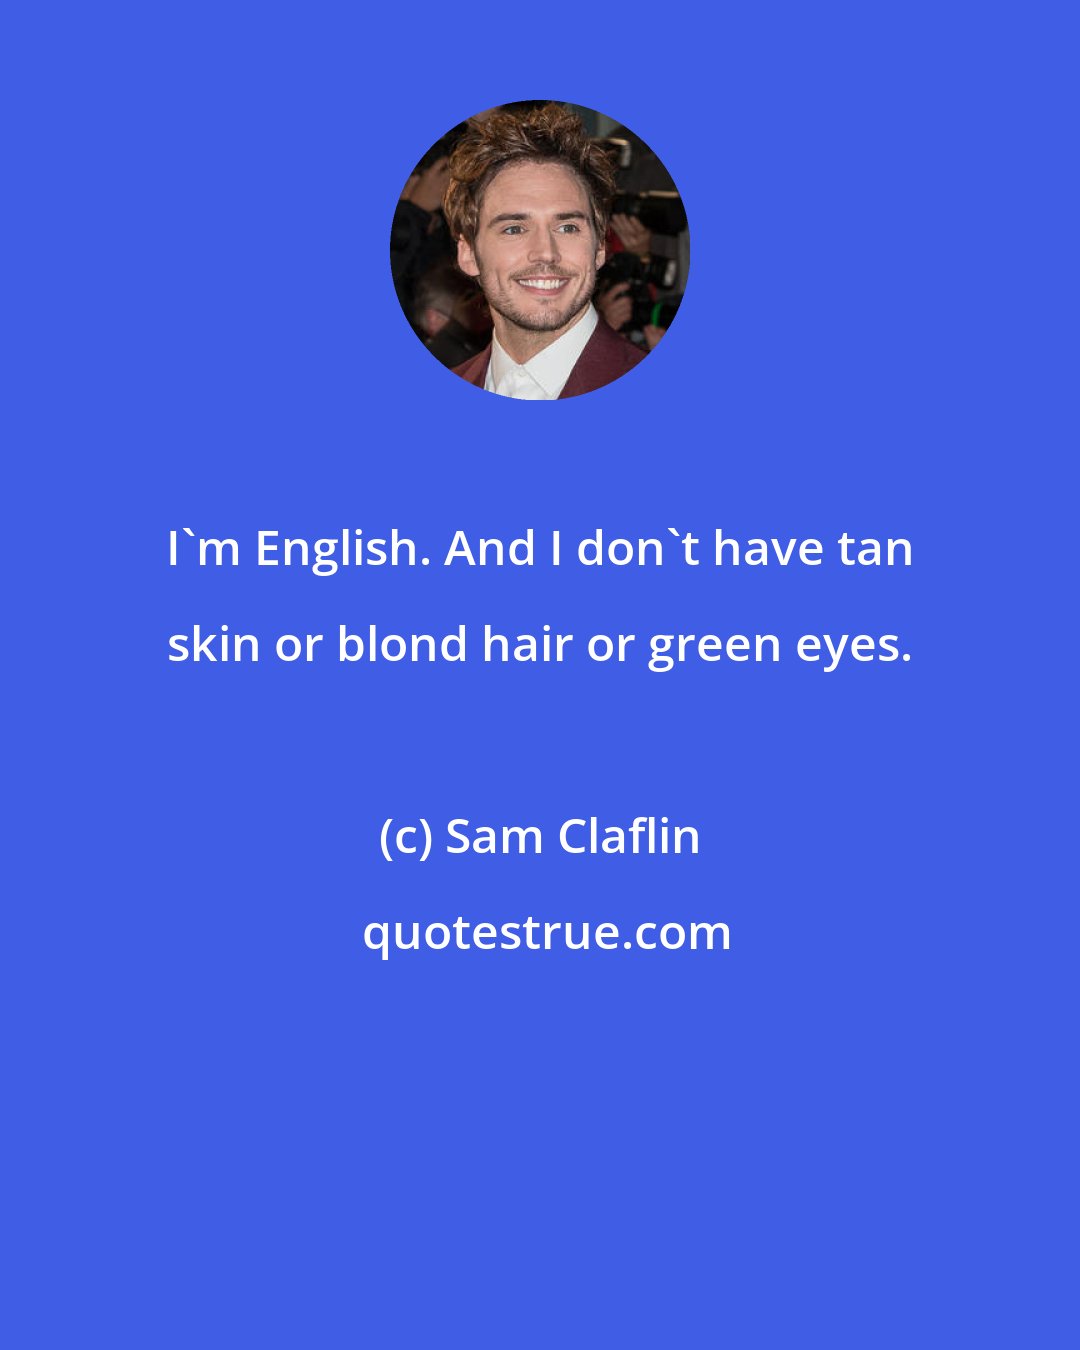 Sam Claflin: I'm English. And I don't have tan skin or blond hair or green eyes.